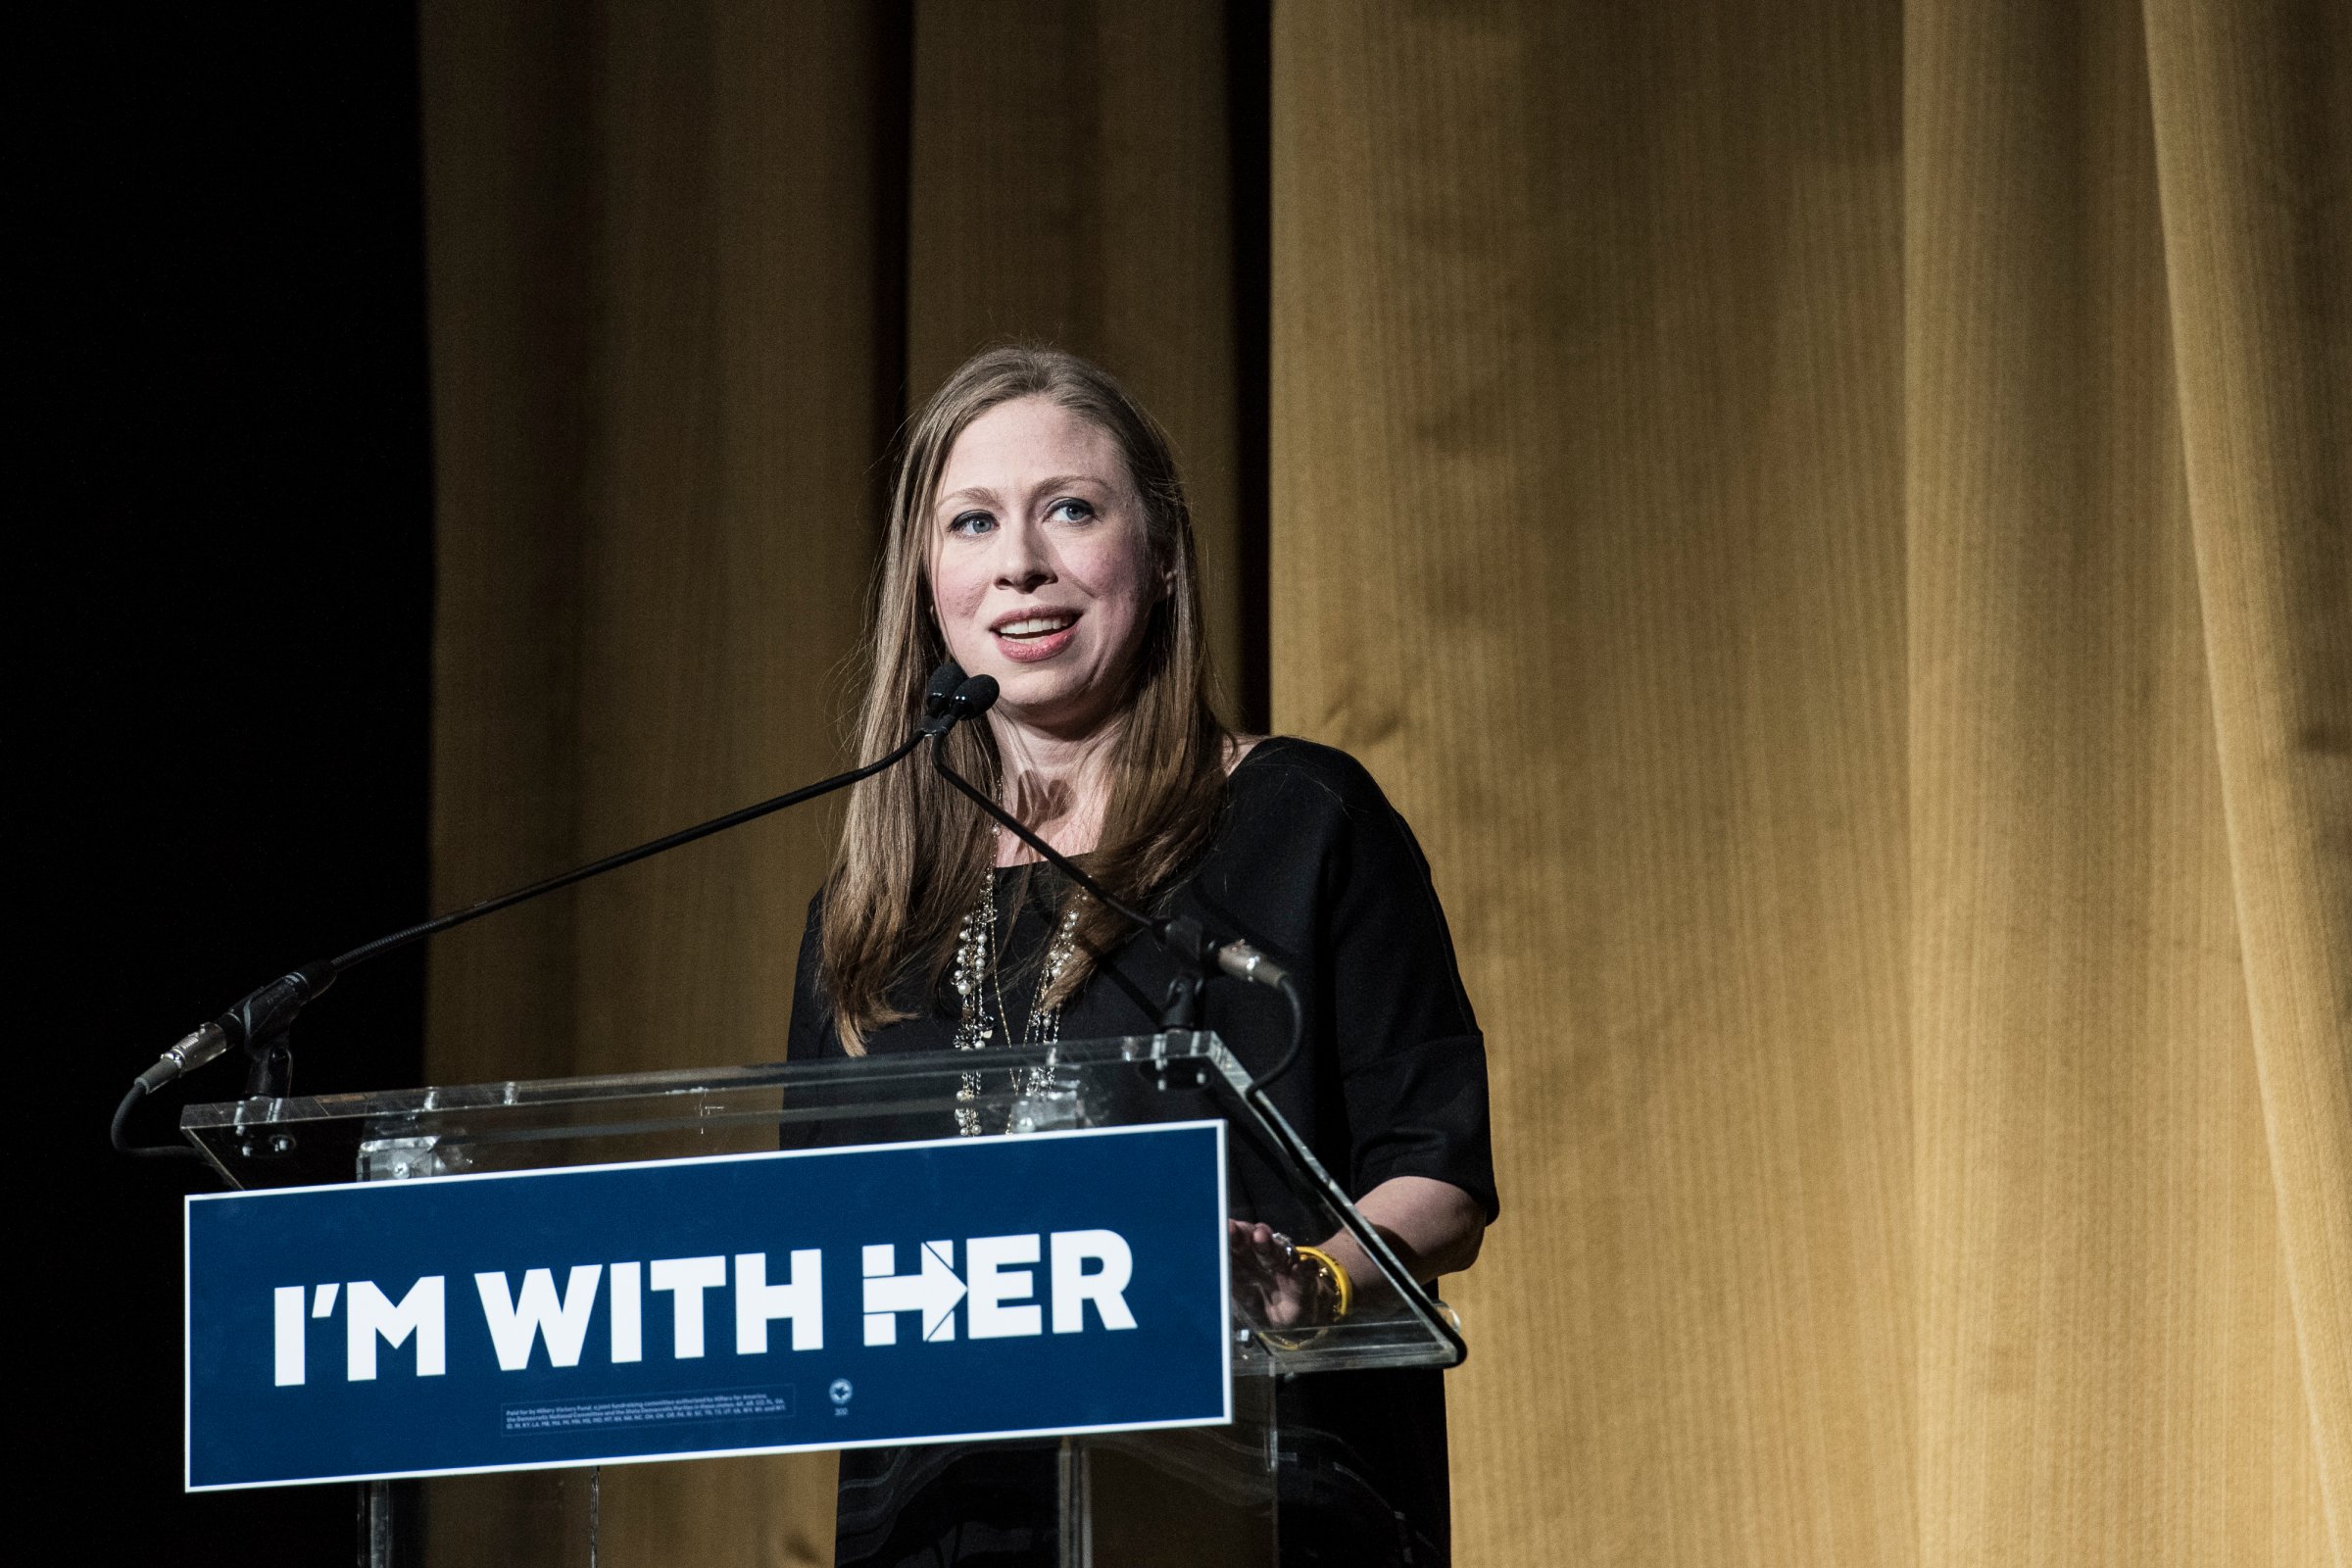 Chelsea Clinton speaks during a fundraiser for her mother, Democratic presidential candidate Hillary Clinton, at Radio City Music Hall on March 2, 2016 in New York City.